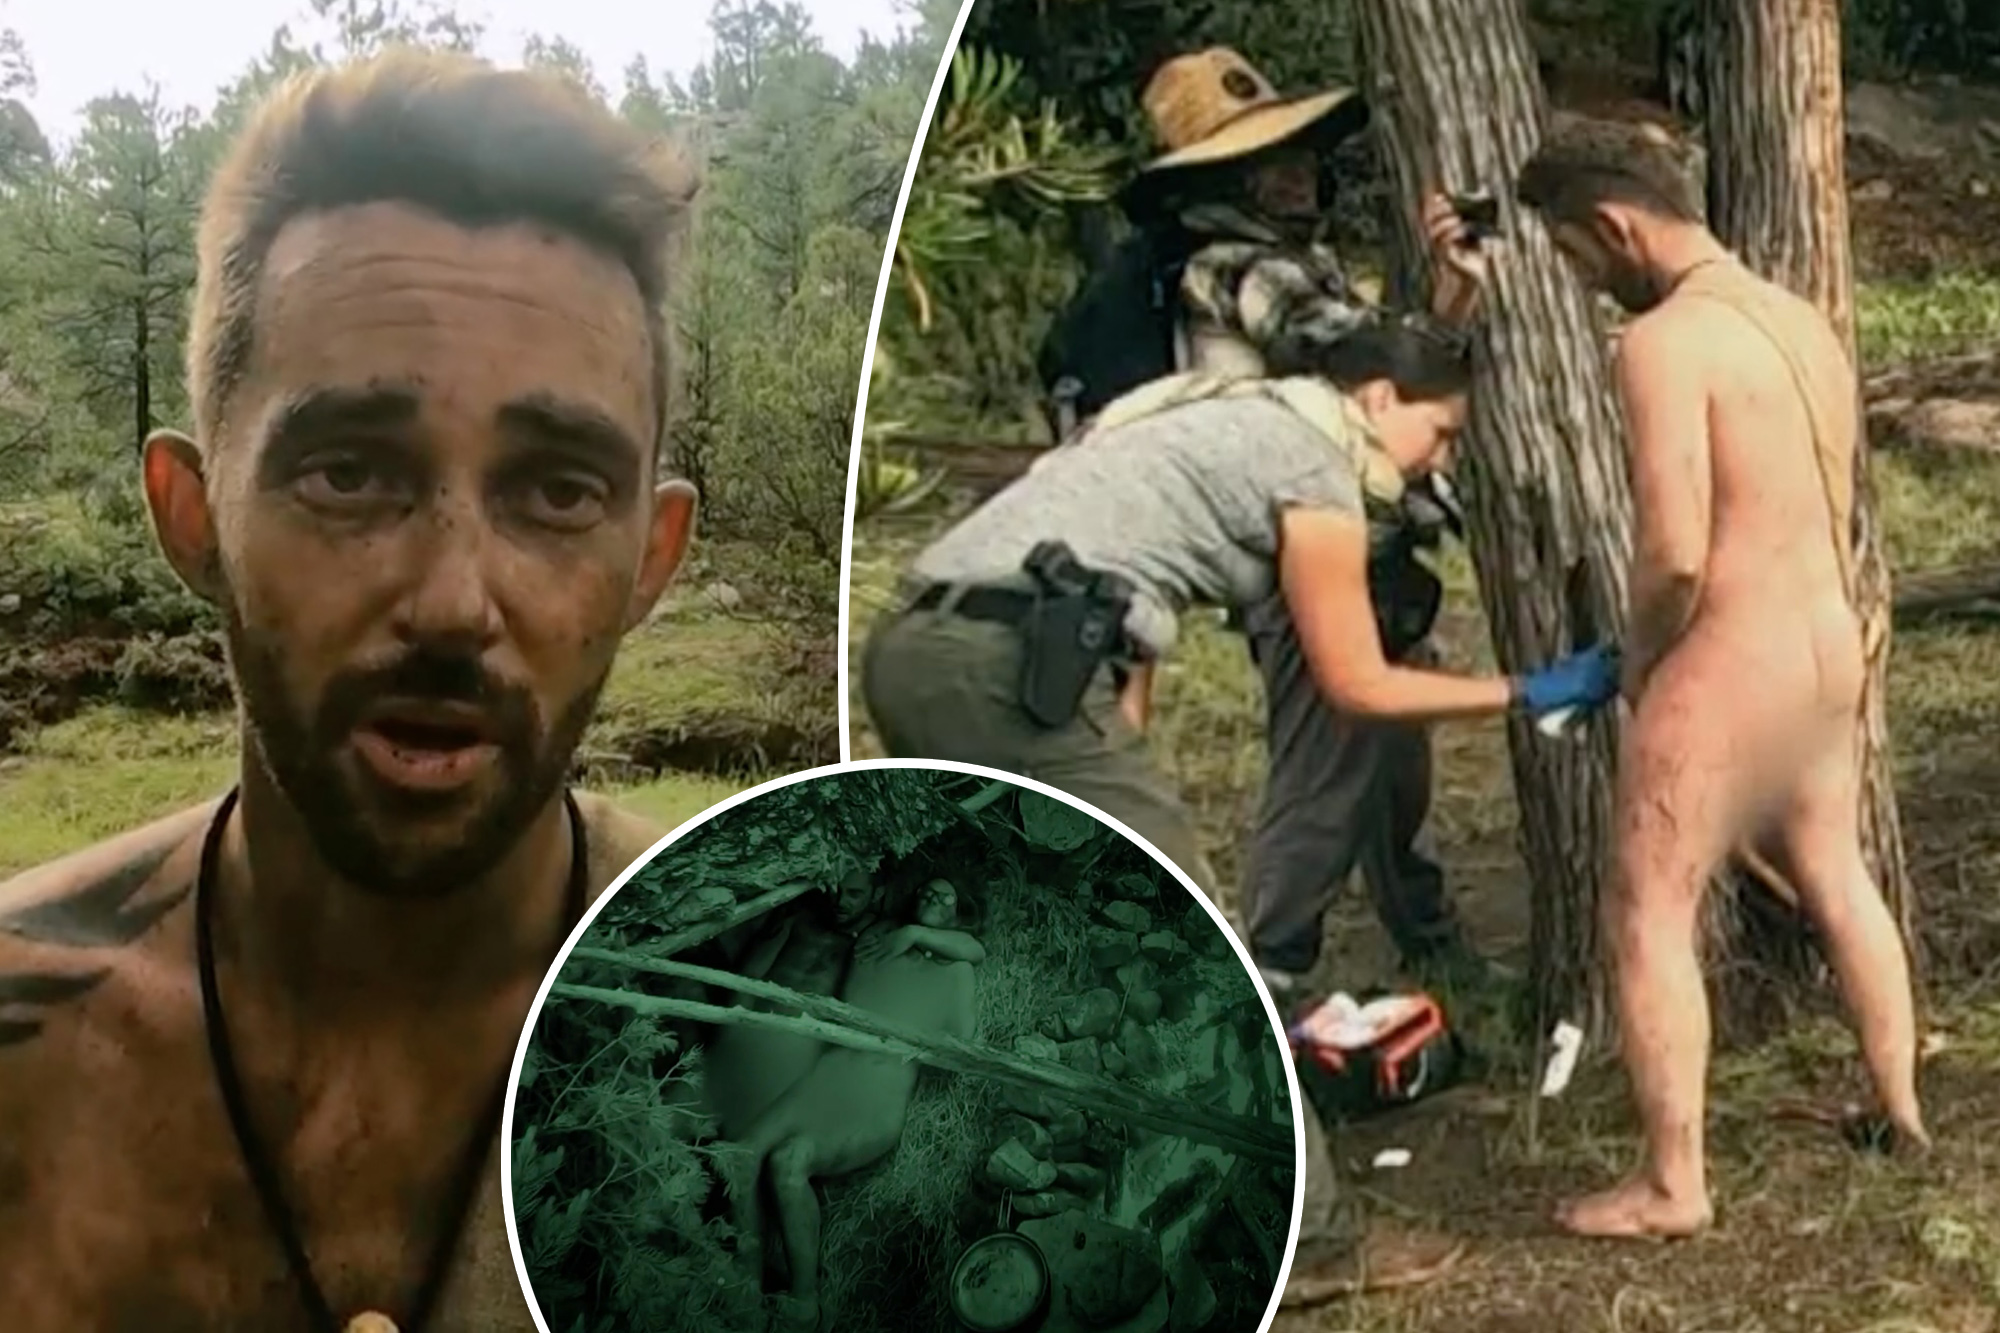 chris palomba add naked and afraid uncensered photo